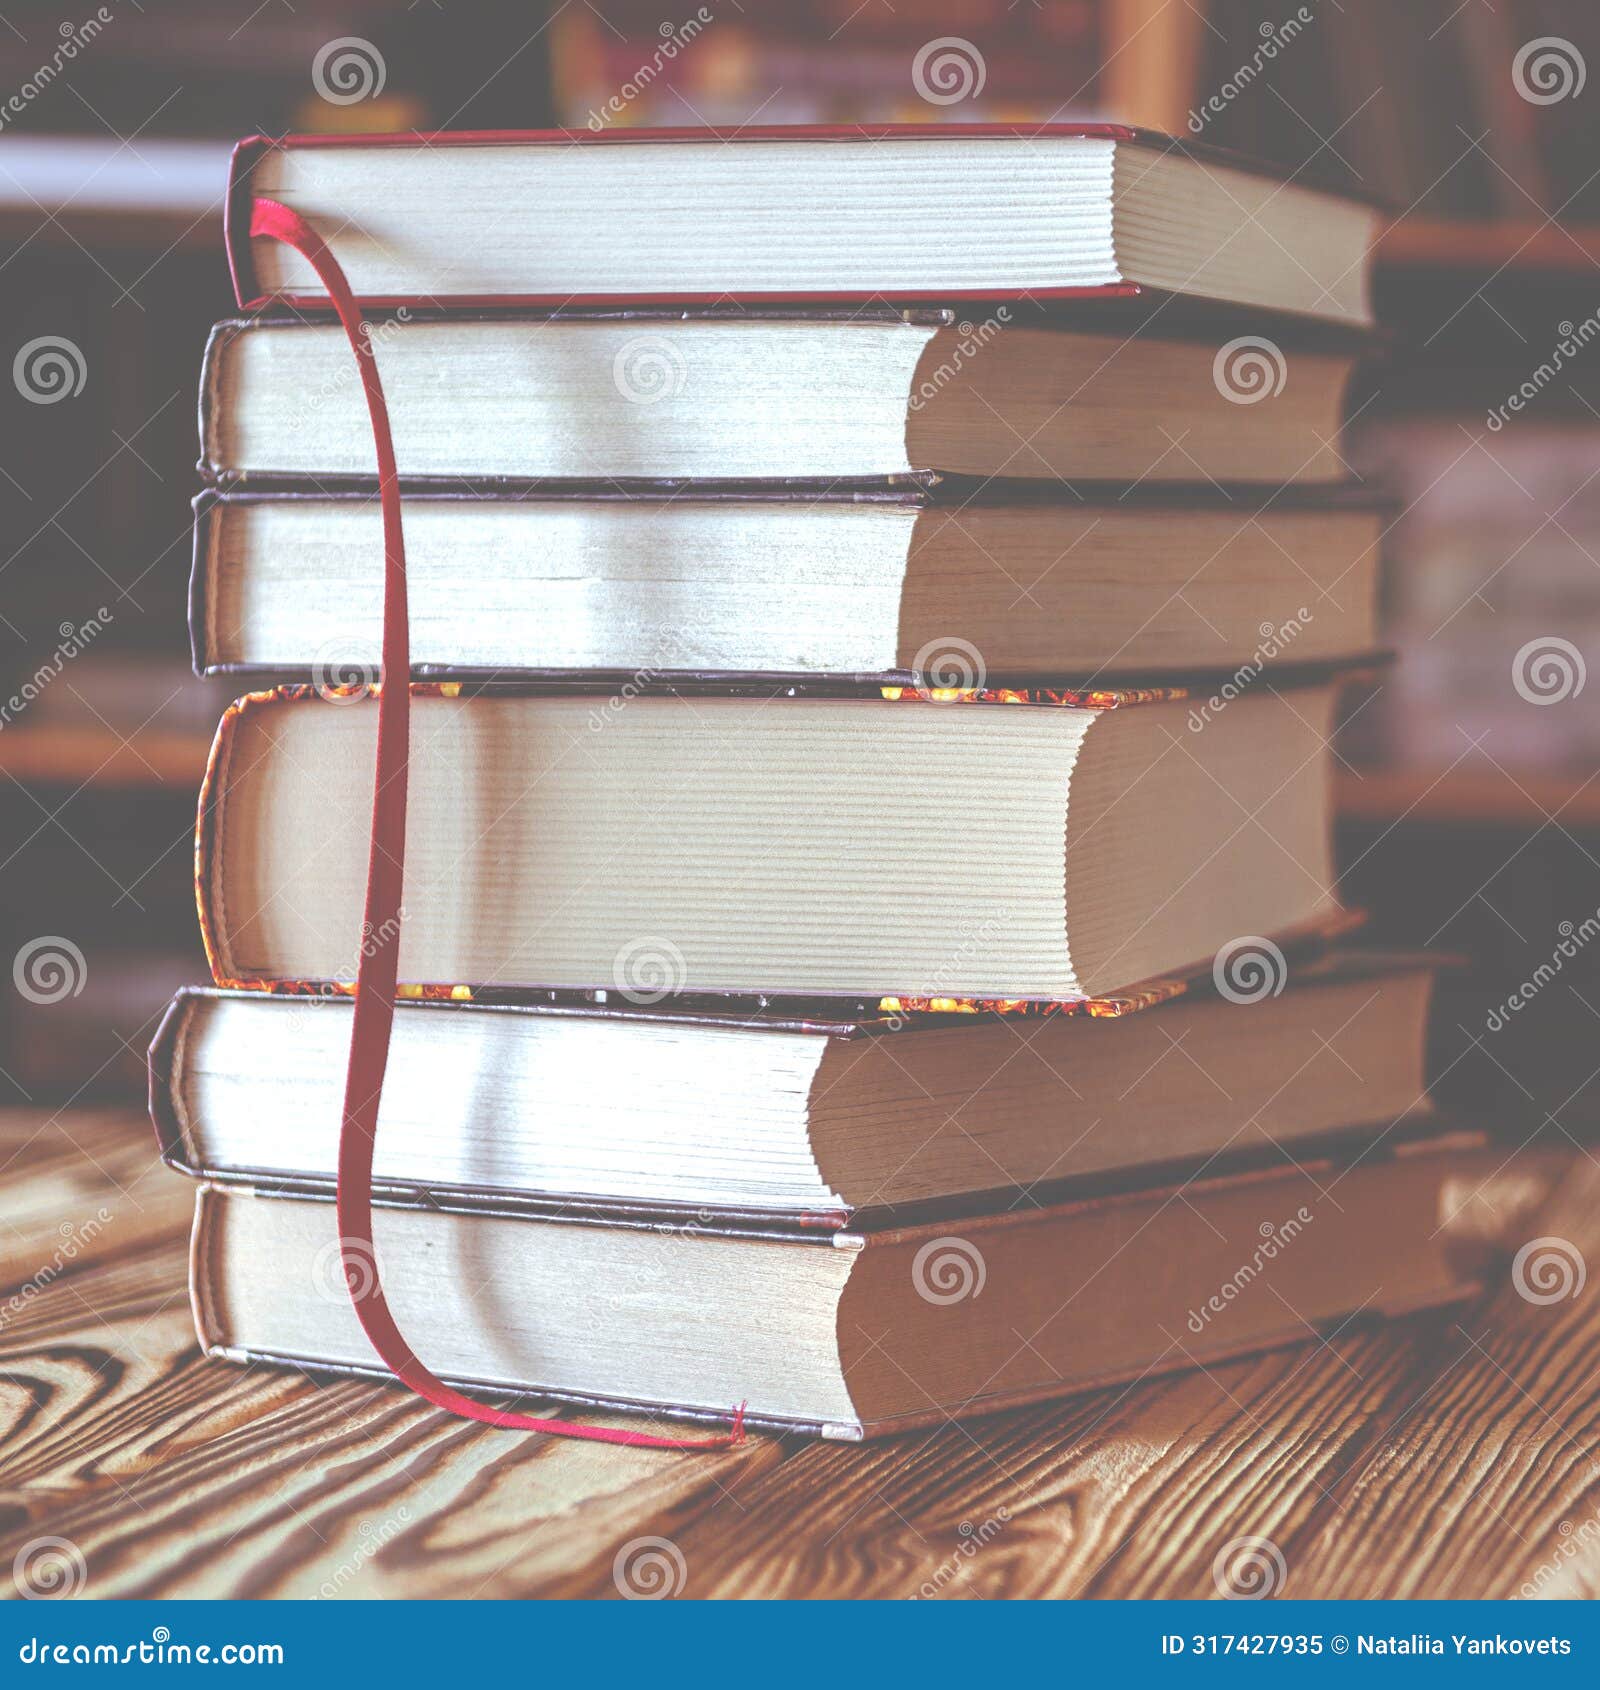 a stack of old books on table against background of bookshelf in library. conceptual background on education, literature